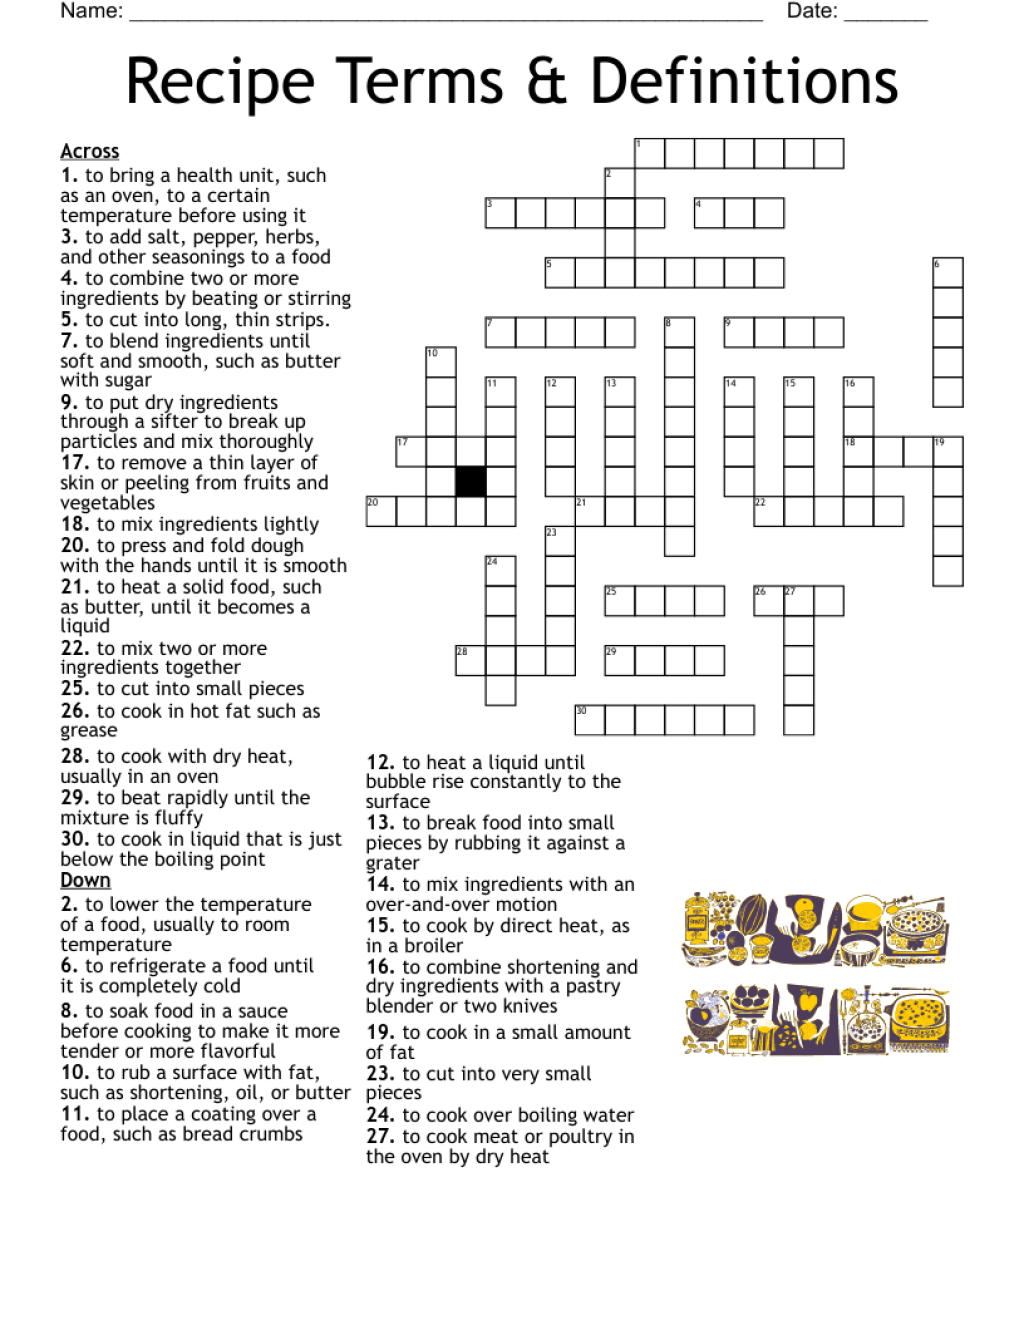 Picture of: Recipe Terms & Definitions Crossword – WordMint